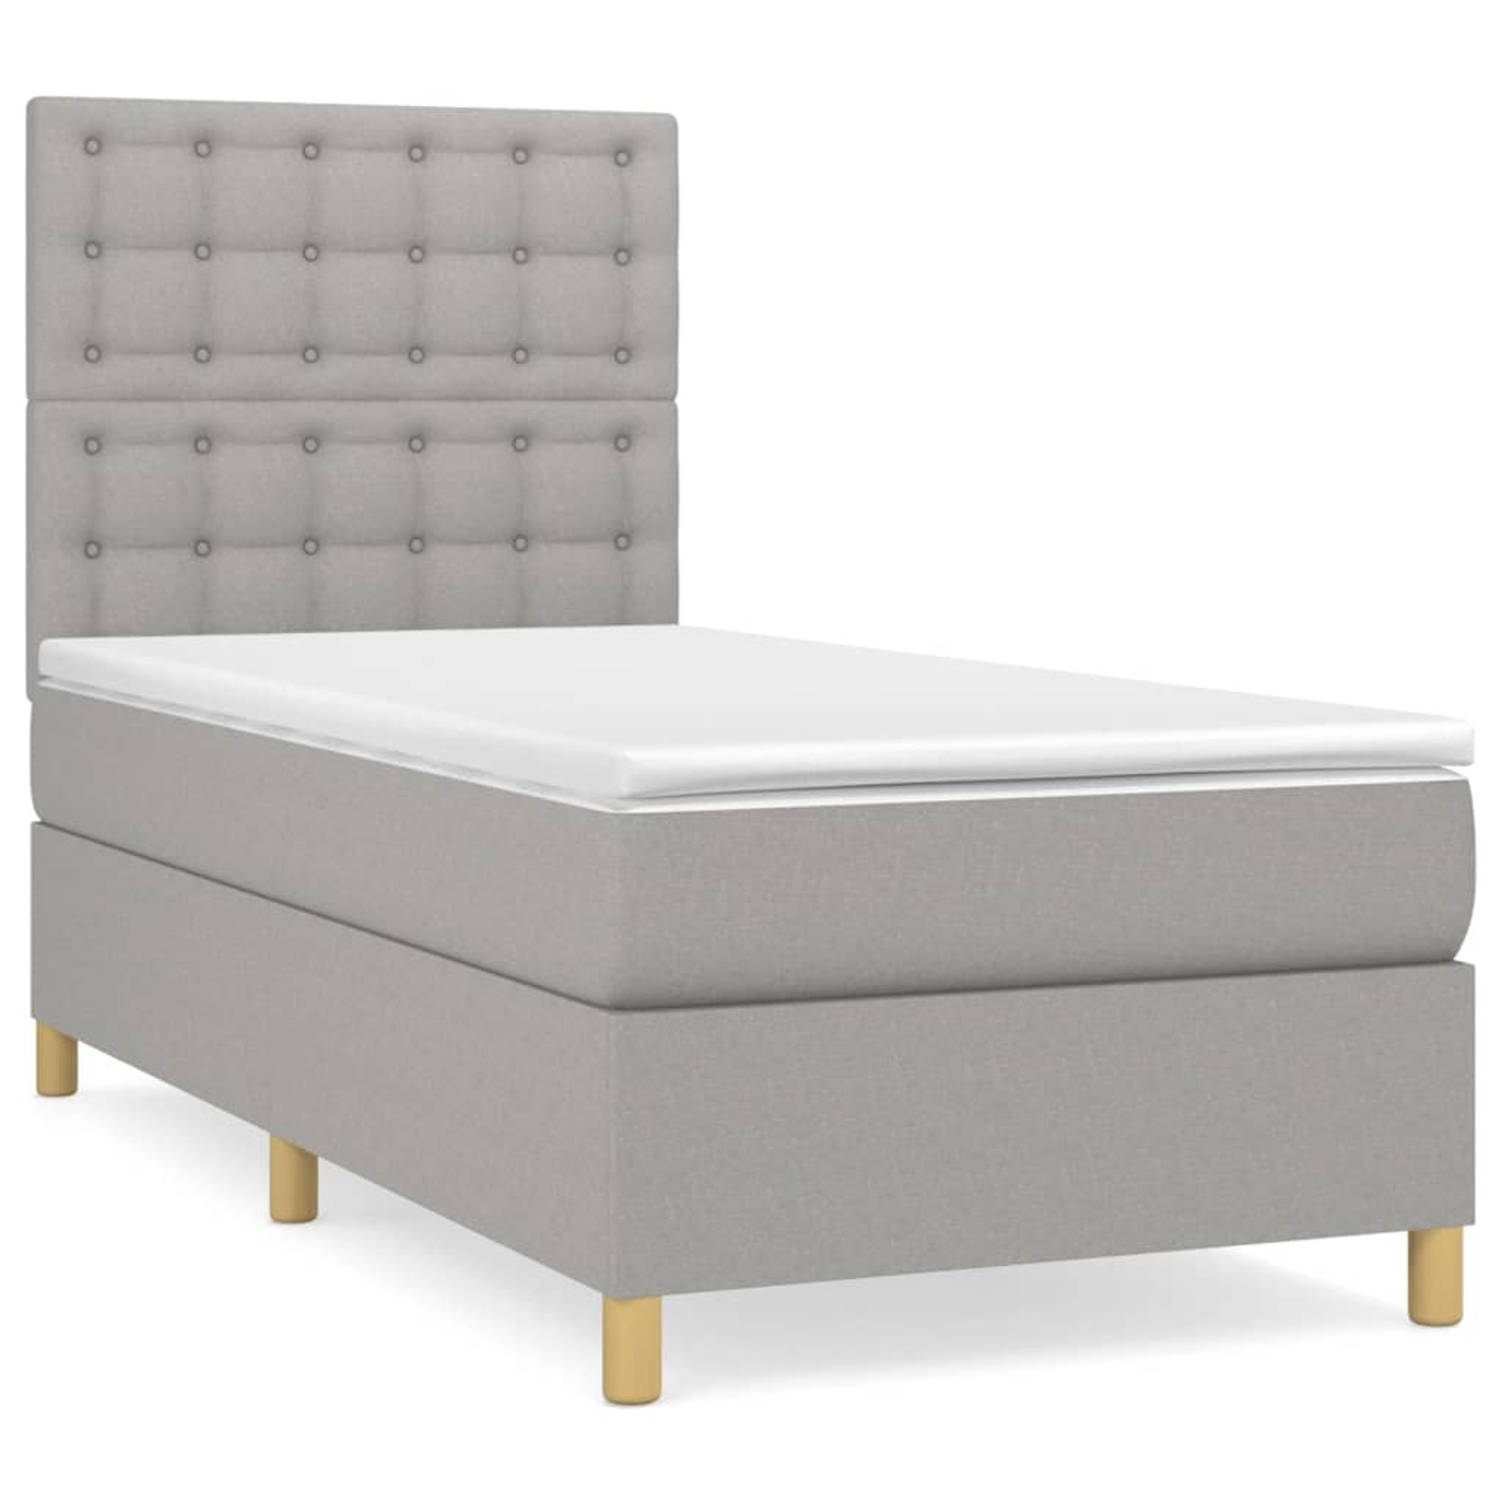 The Living Store Boxspringbed - Comfort - 100 x 200 cm - Duurzaam materiaal